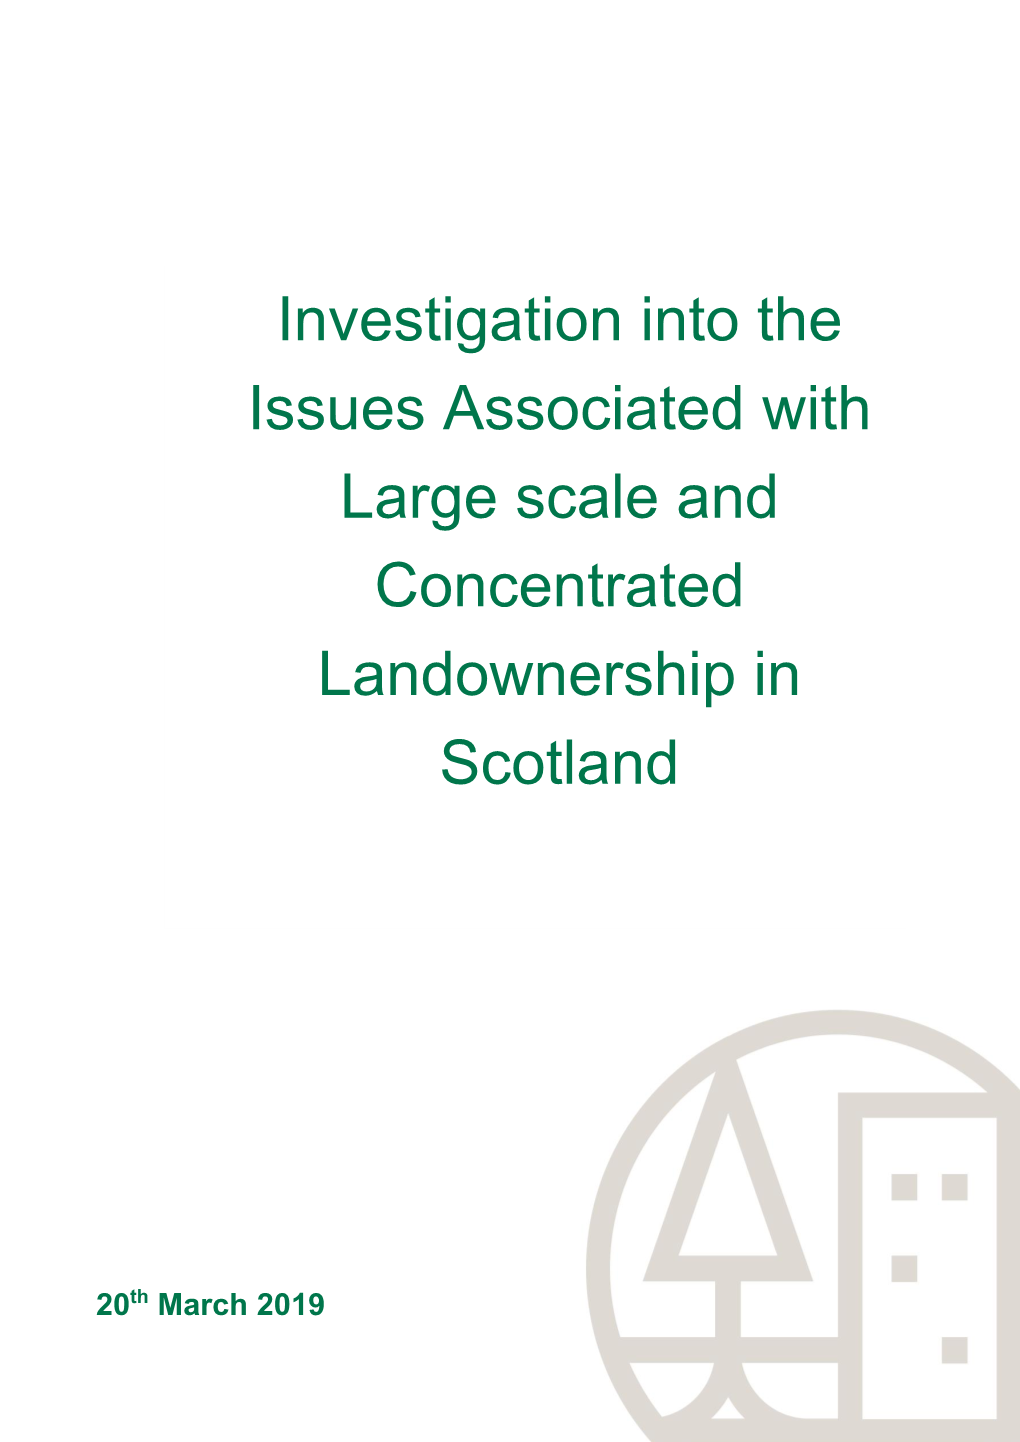 The Impact of Concentrated Land Ownership